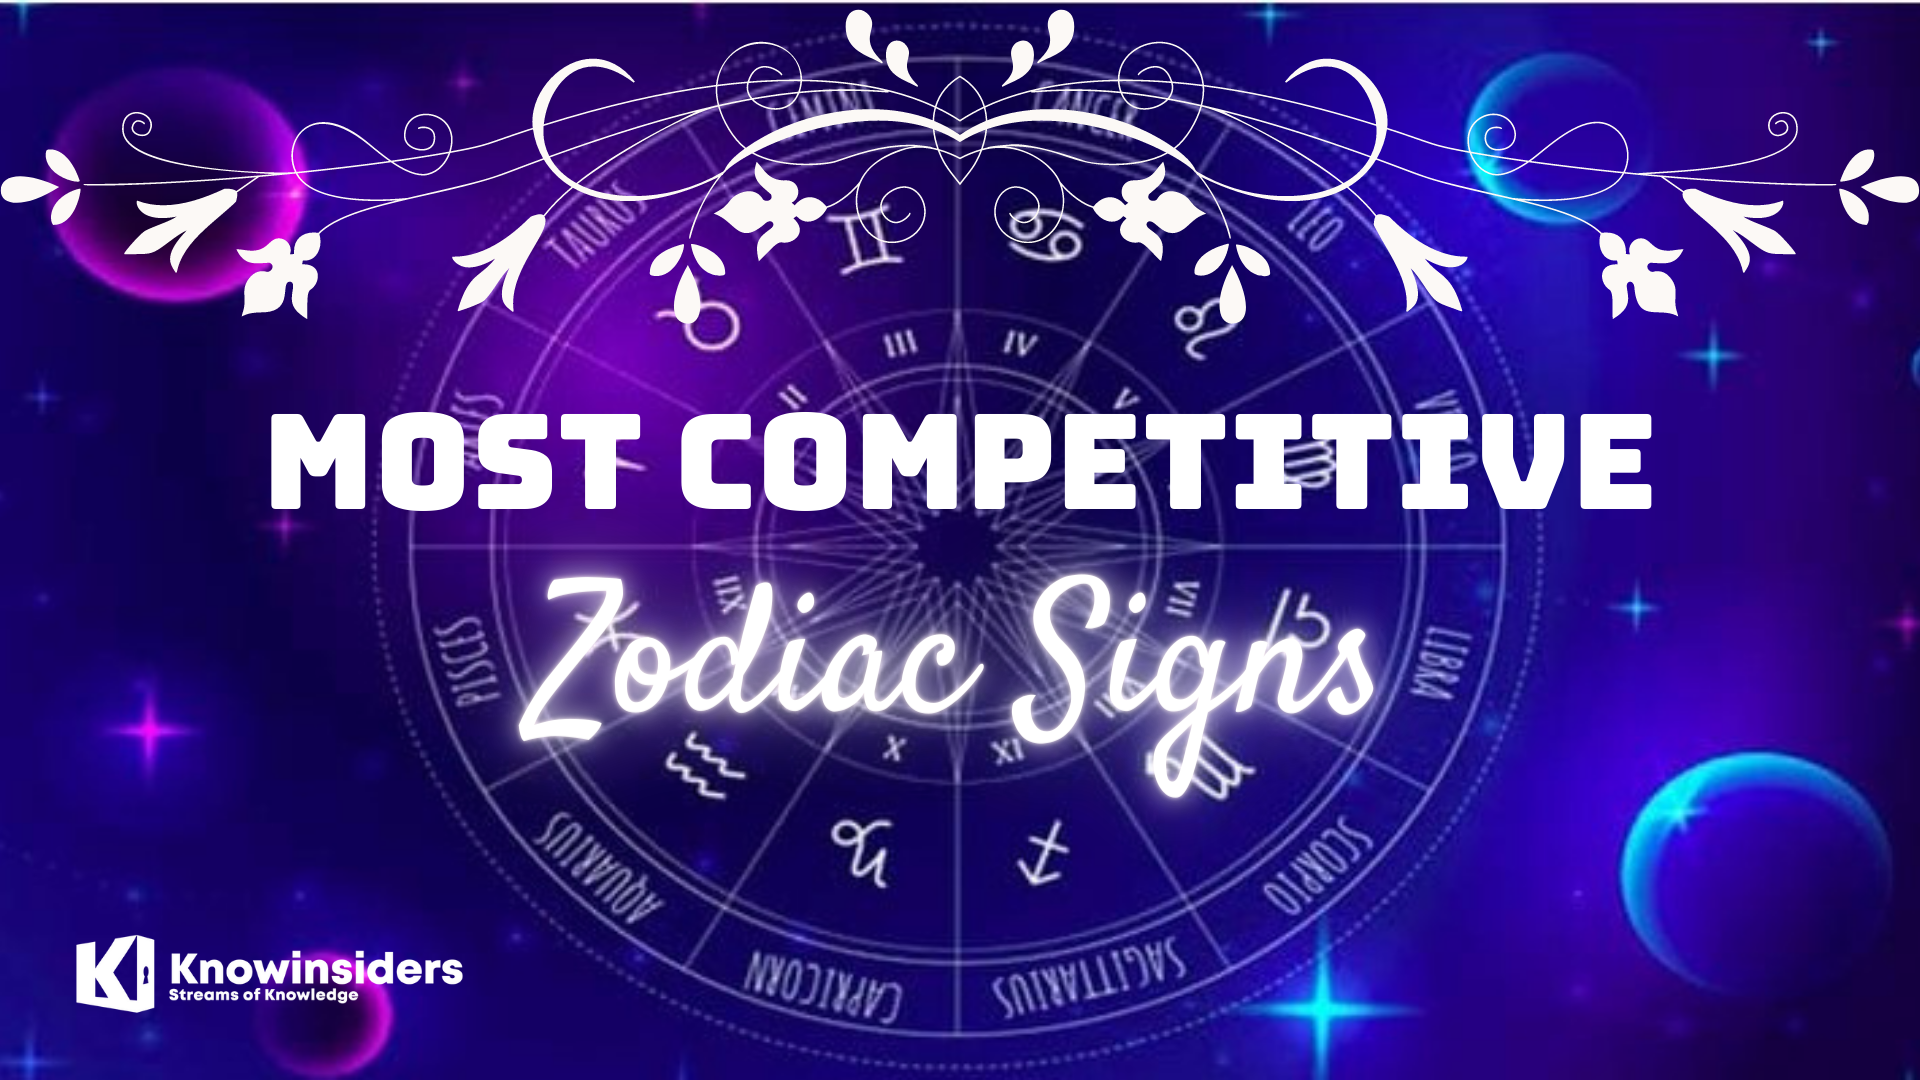 Most Competitive Zodiac Signs. Photo: Knowinsiders.